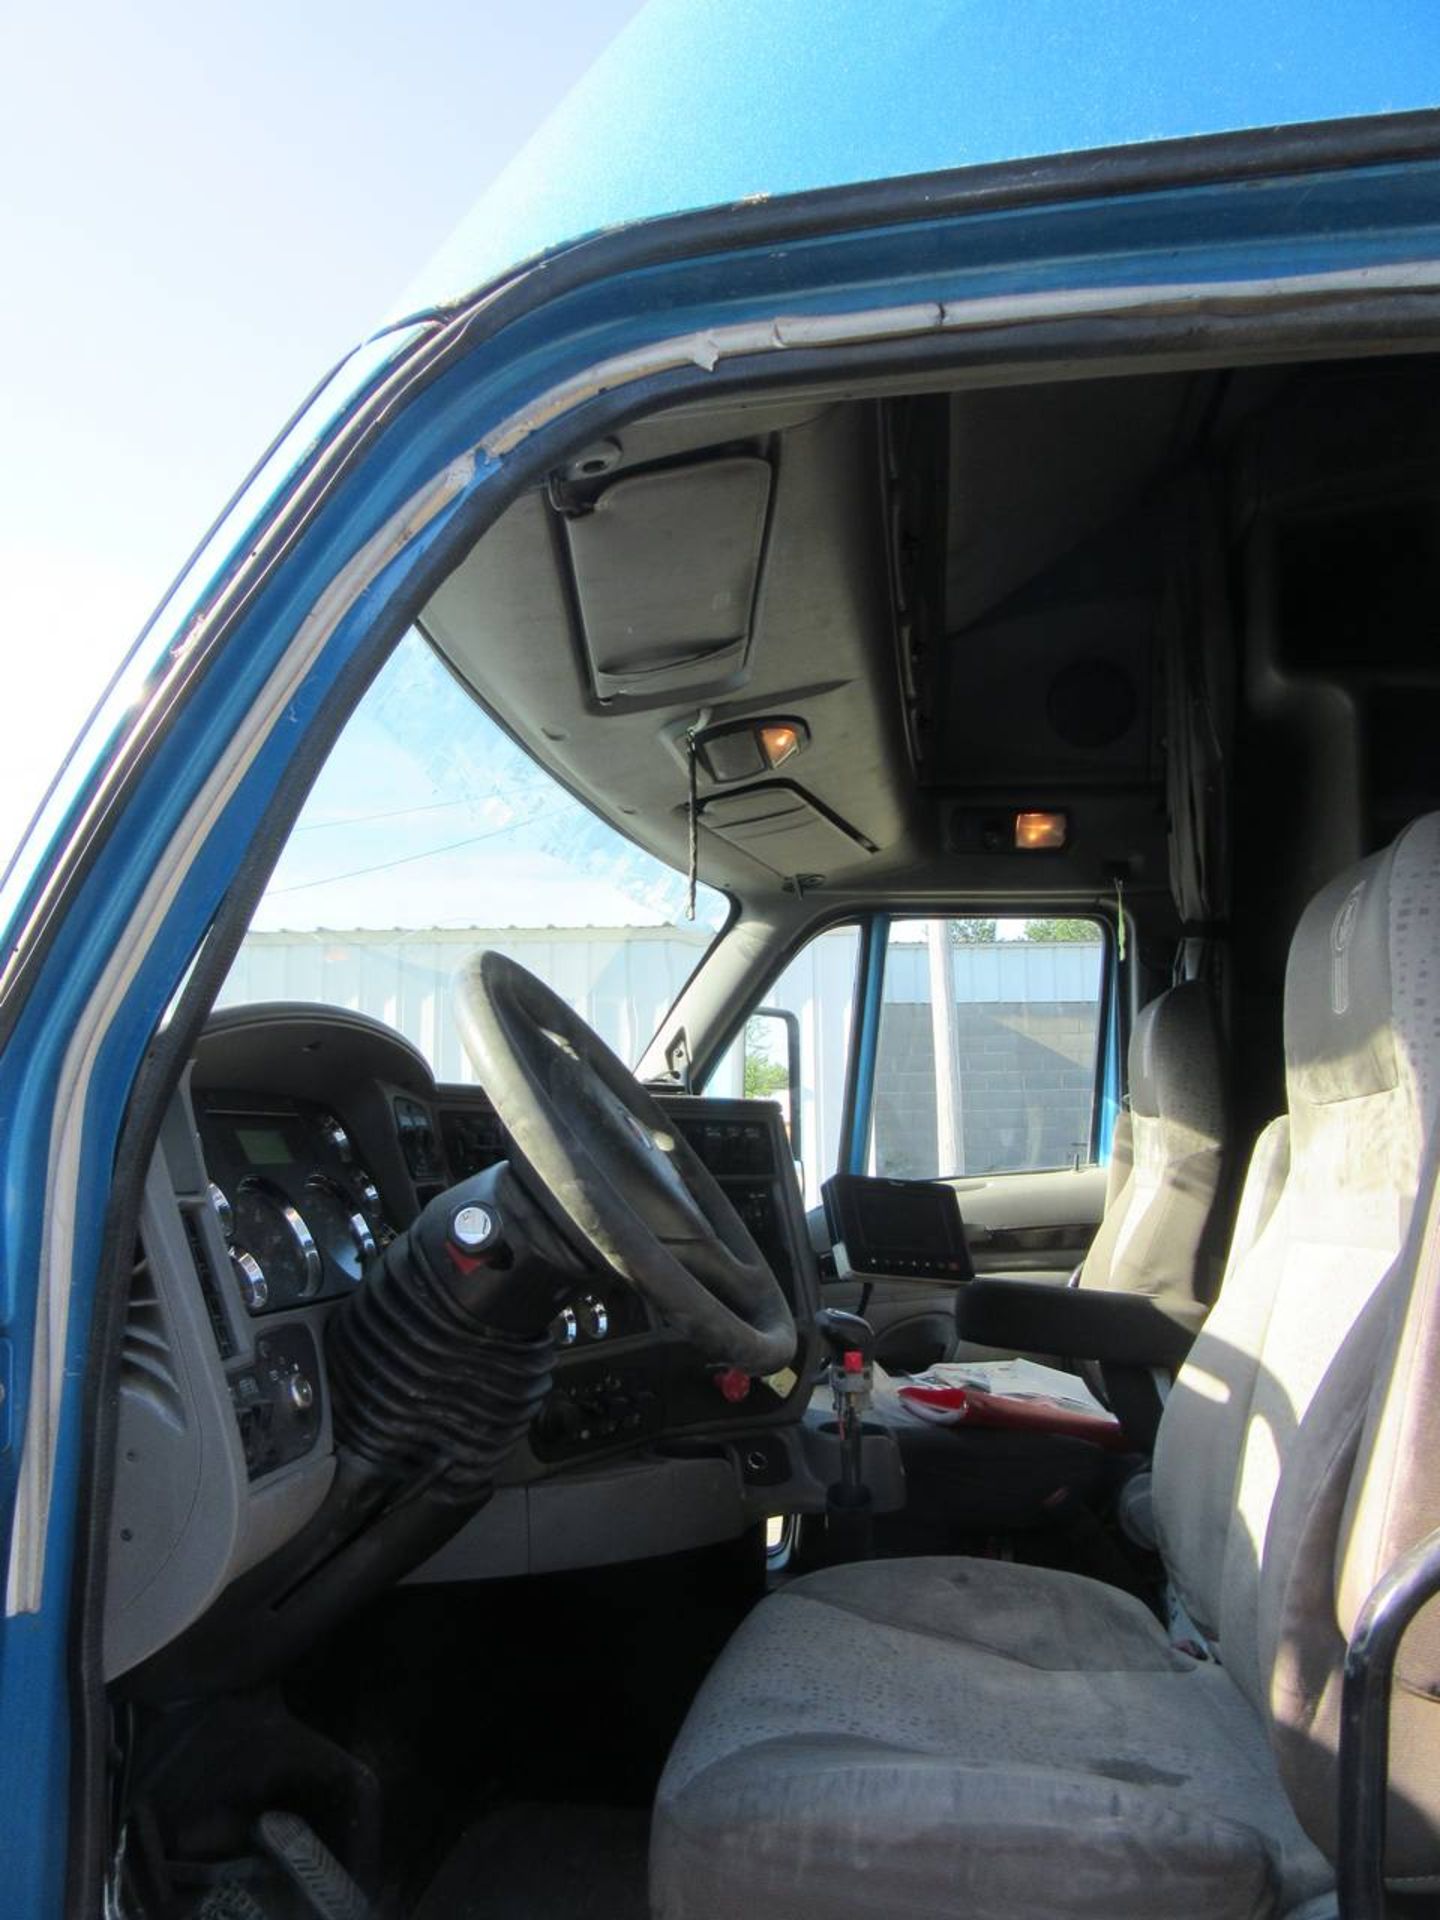 2013 Kenworth T700 Tractor - Image 7 of 10